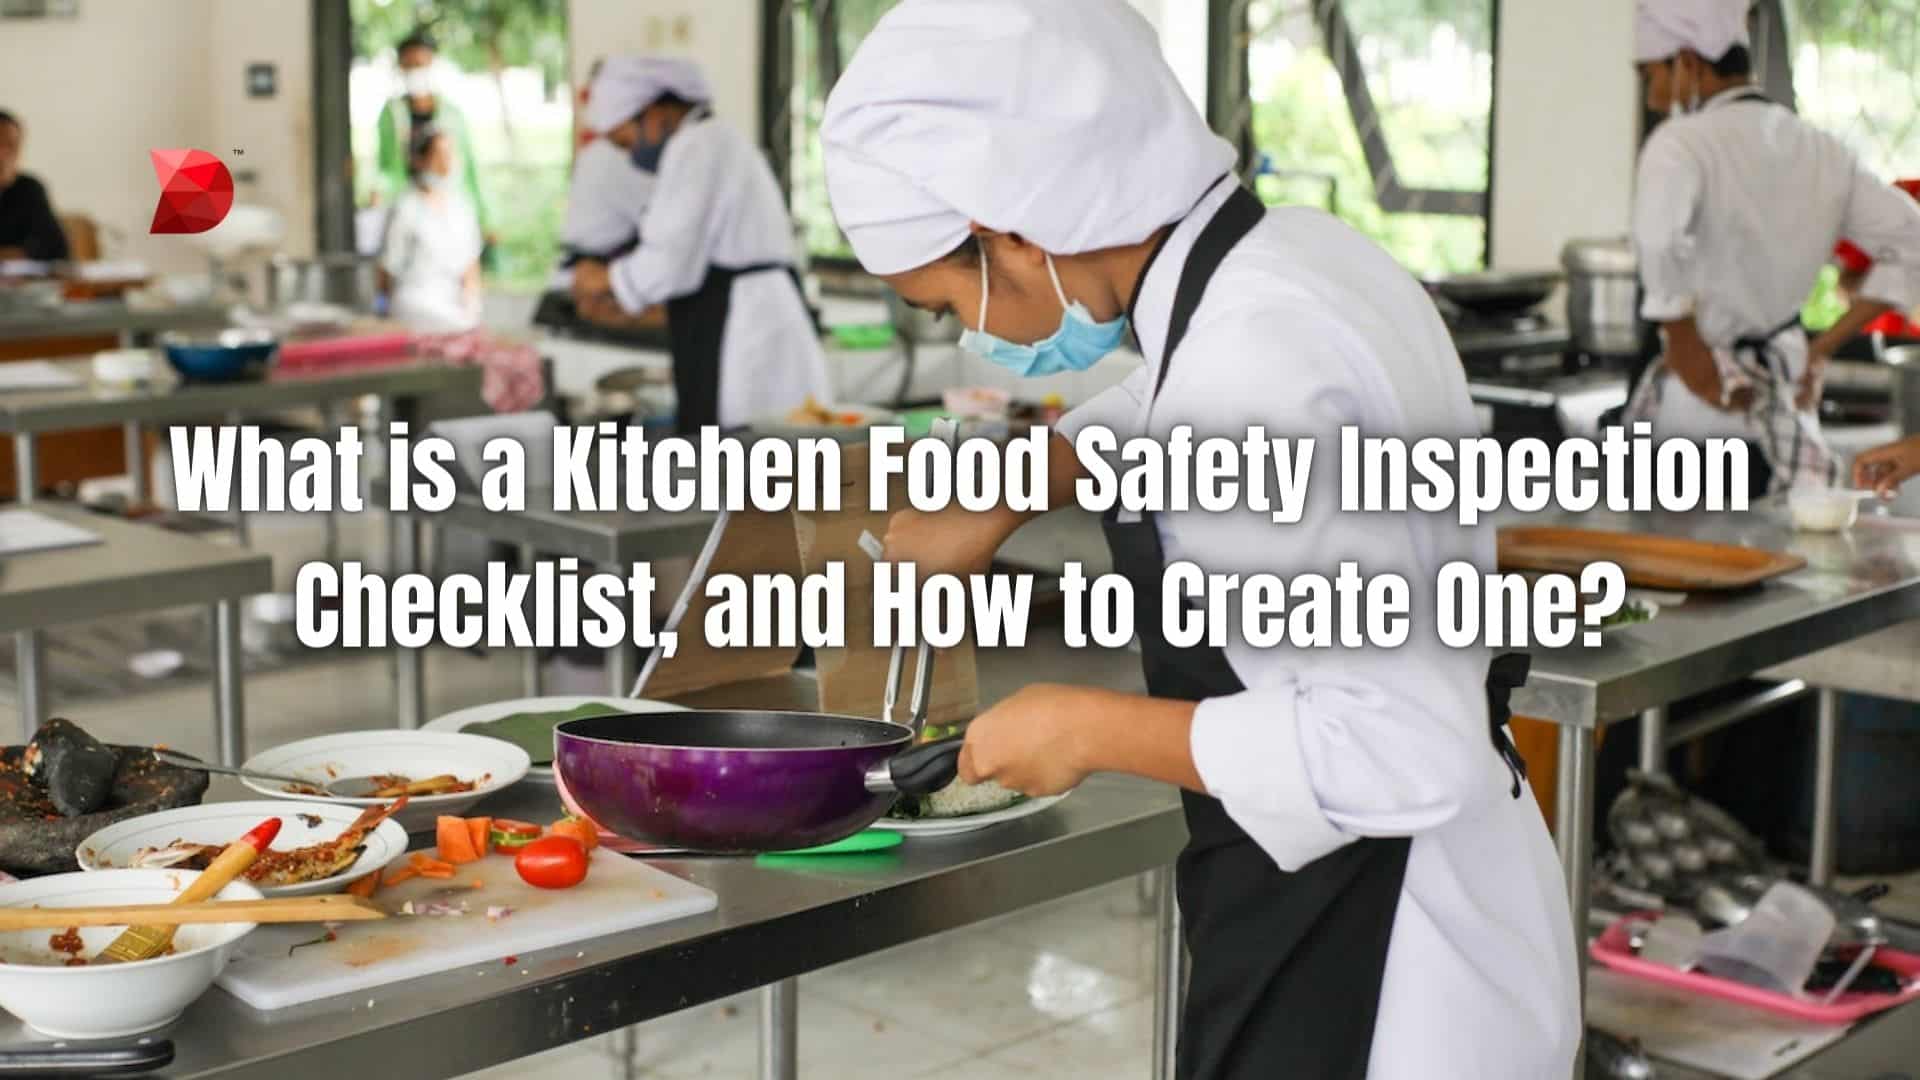 What is a Kitchen Food Safety Inspection Checklist, and How to Create One